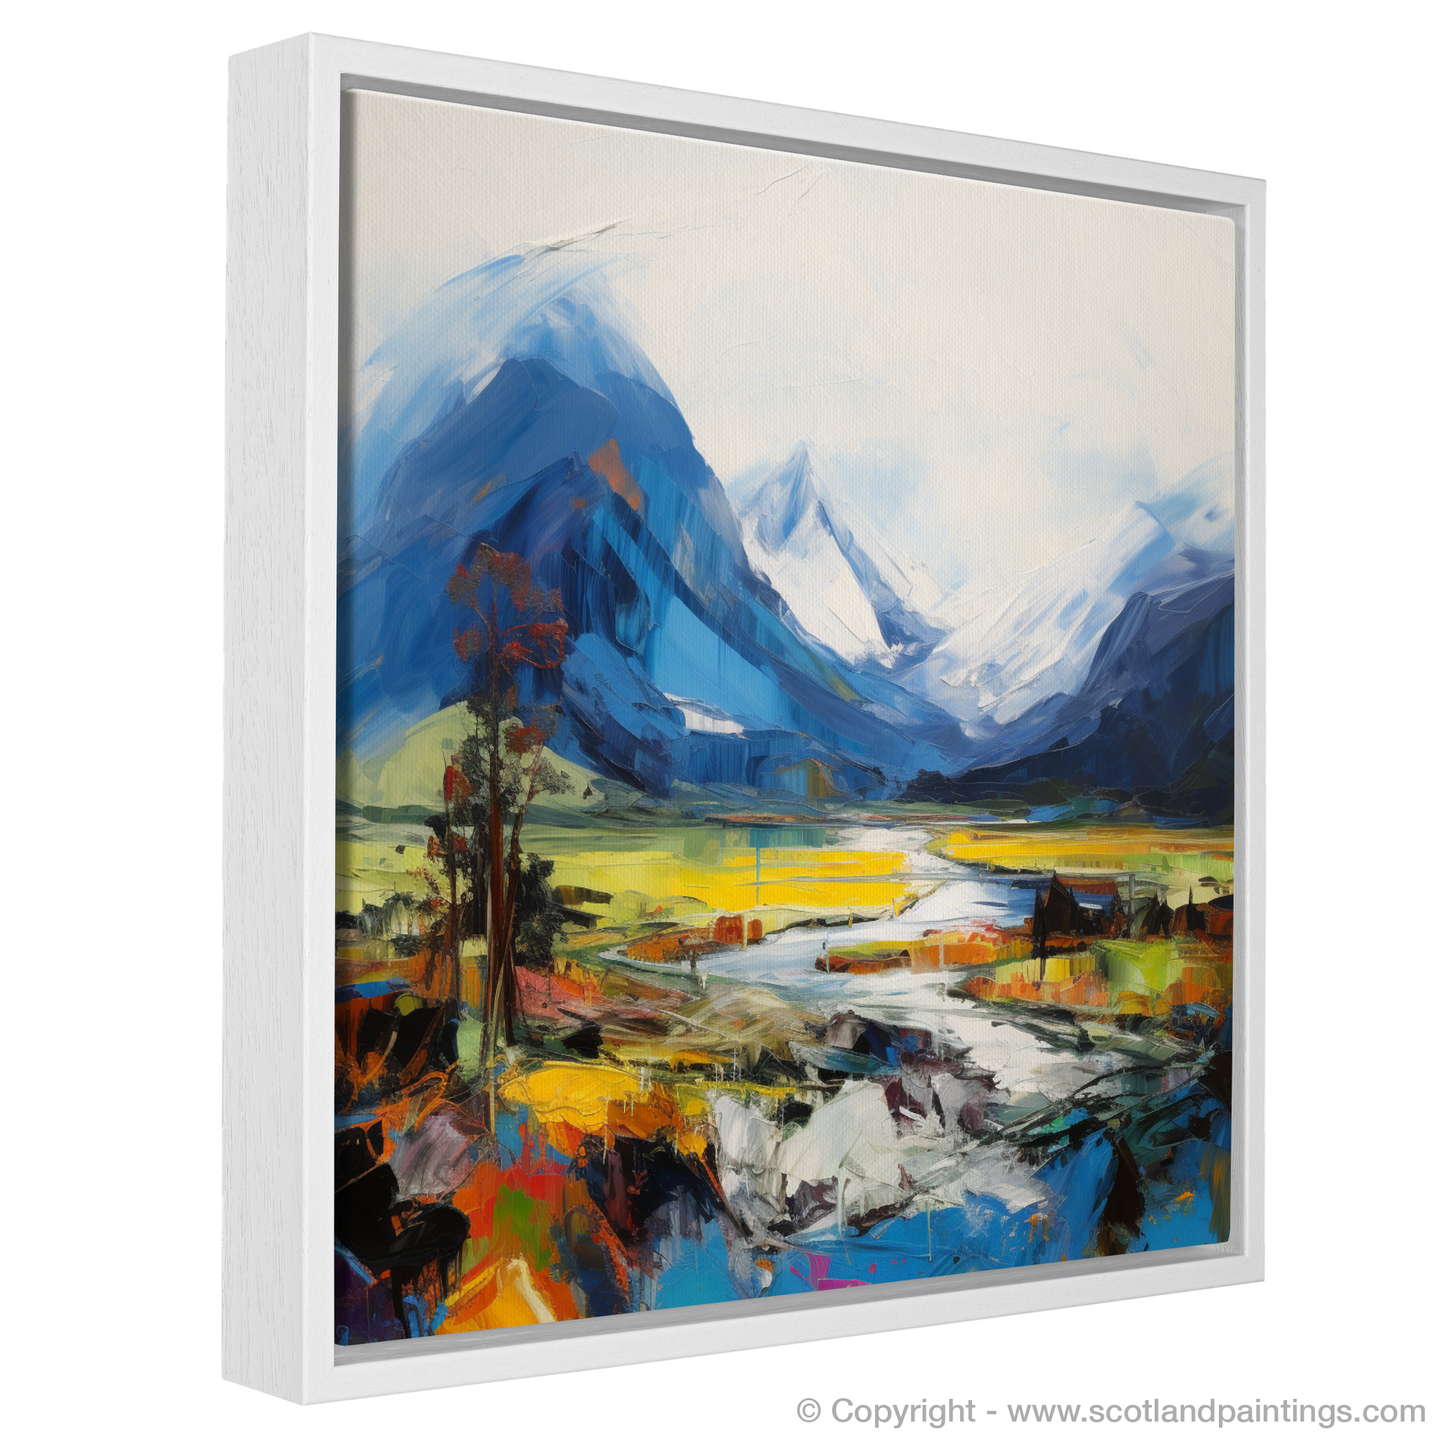 Painting and Art Print of Ben Nevis entitled "The Majesty of Ben Nevis: An Expressionist Homage to Scotland's Wild Beauty".